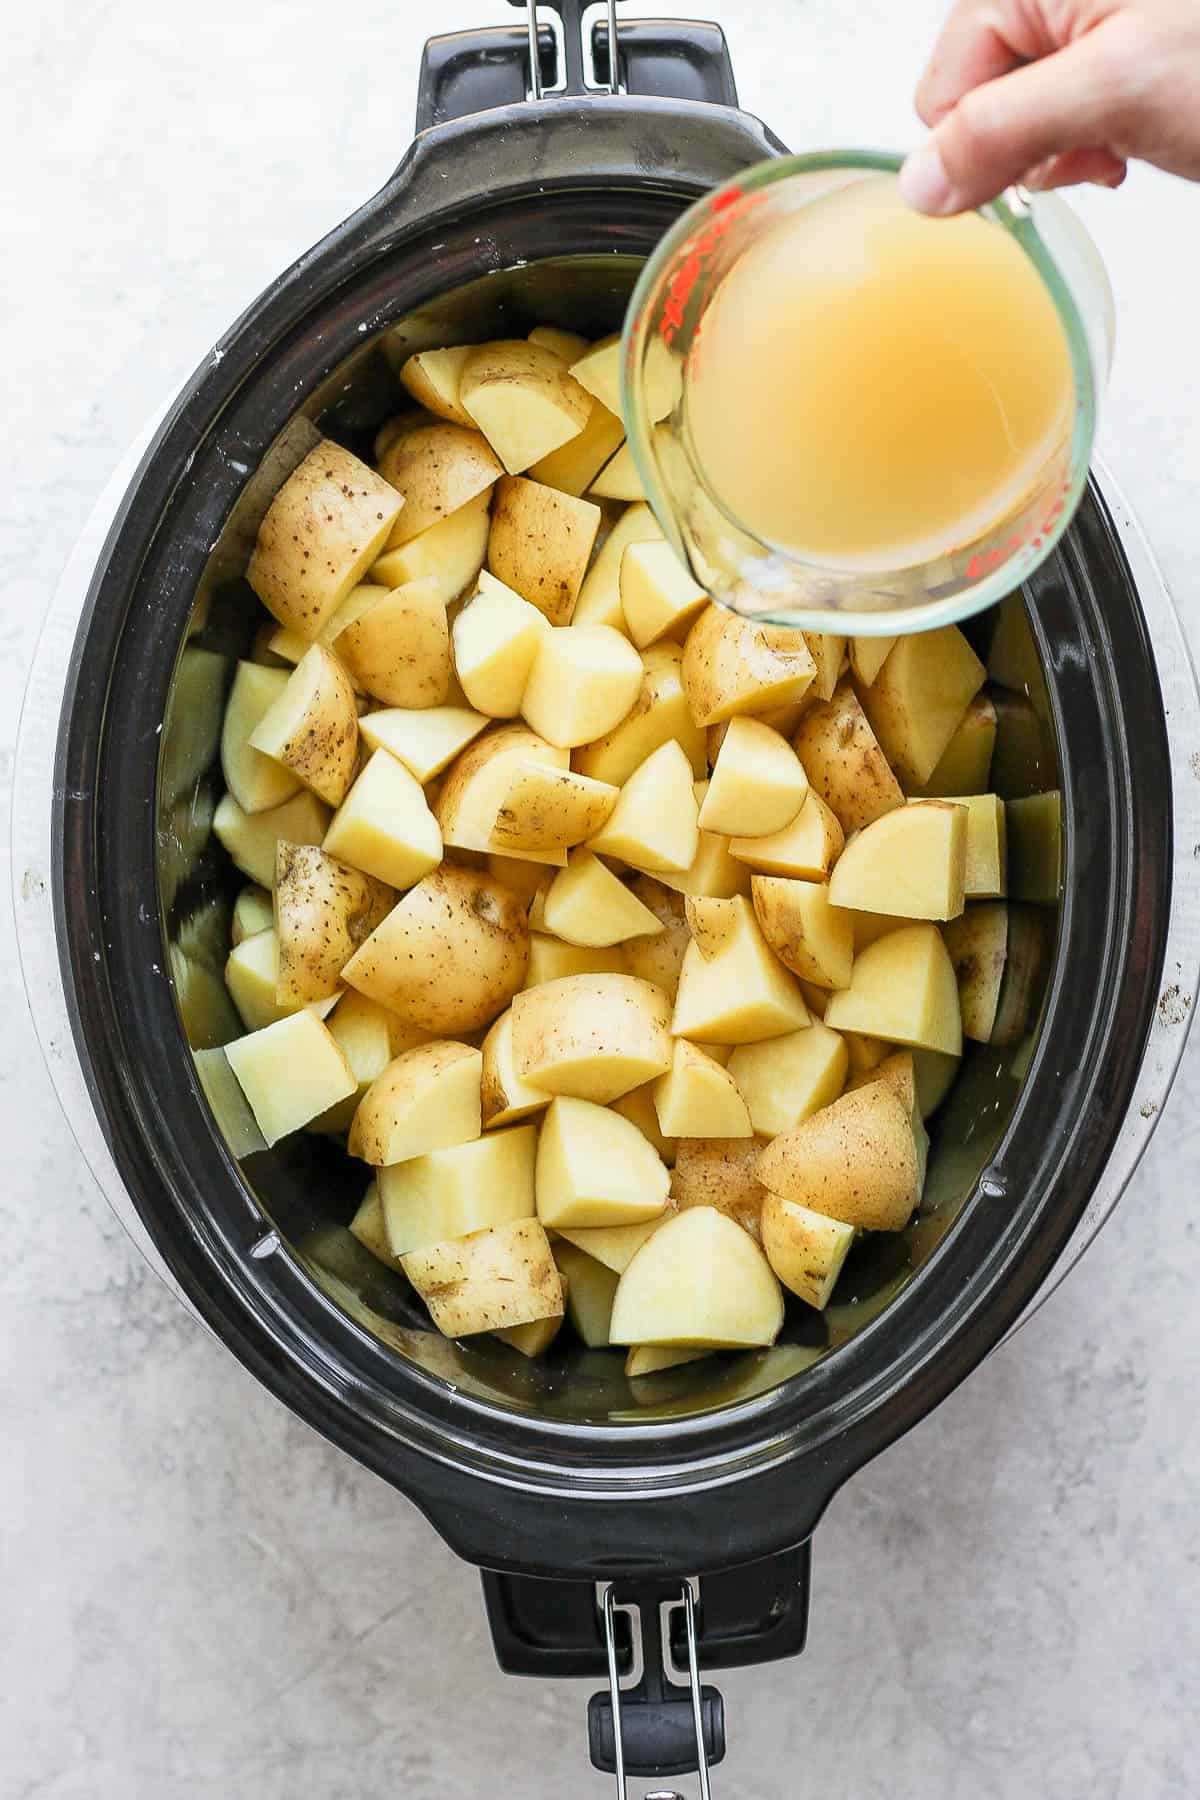 A measuring cup of chicken broth being poured over the top of the cubed yukon potatoes in the slow cooker.